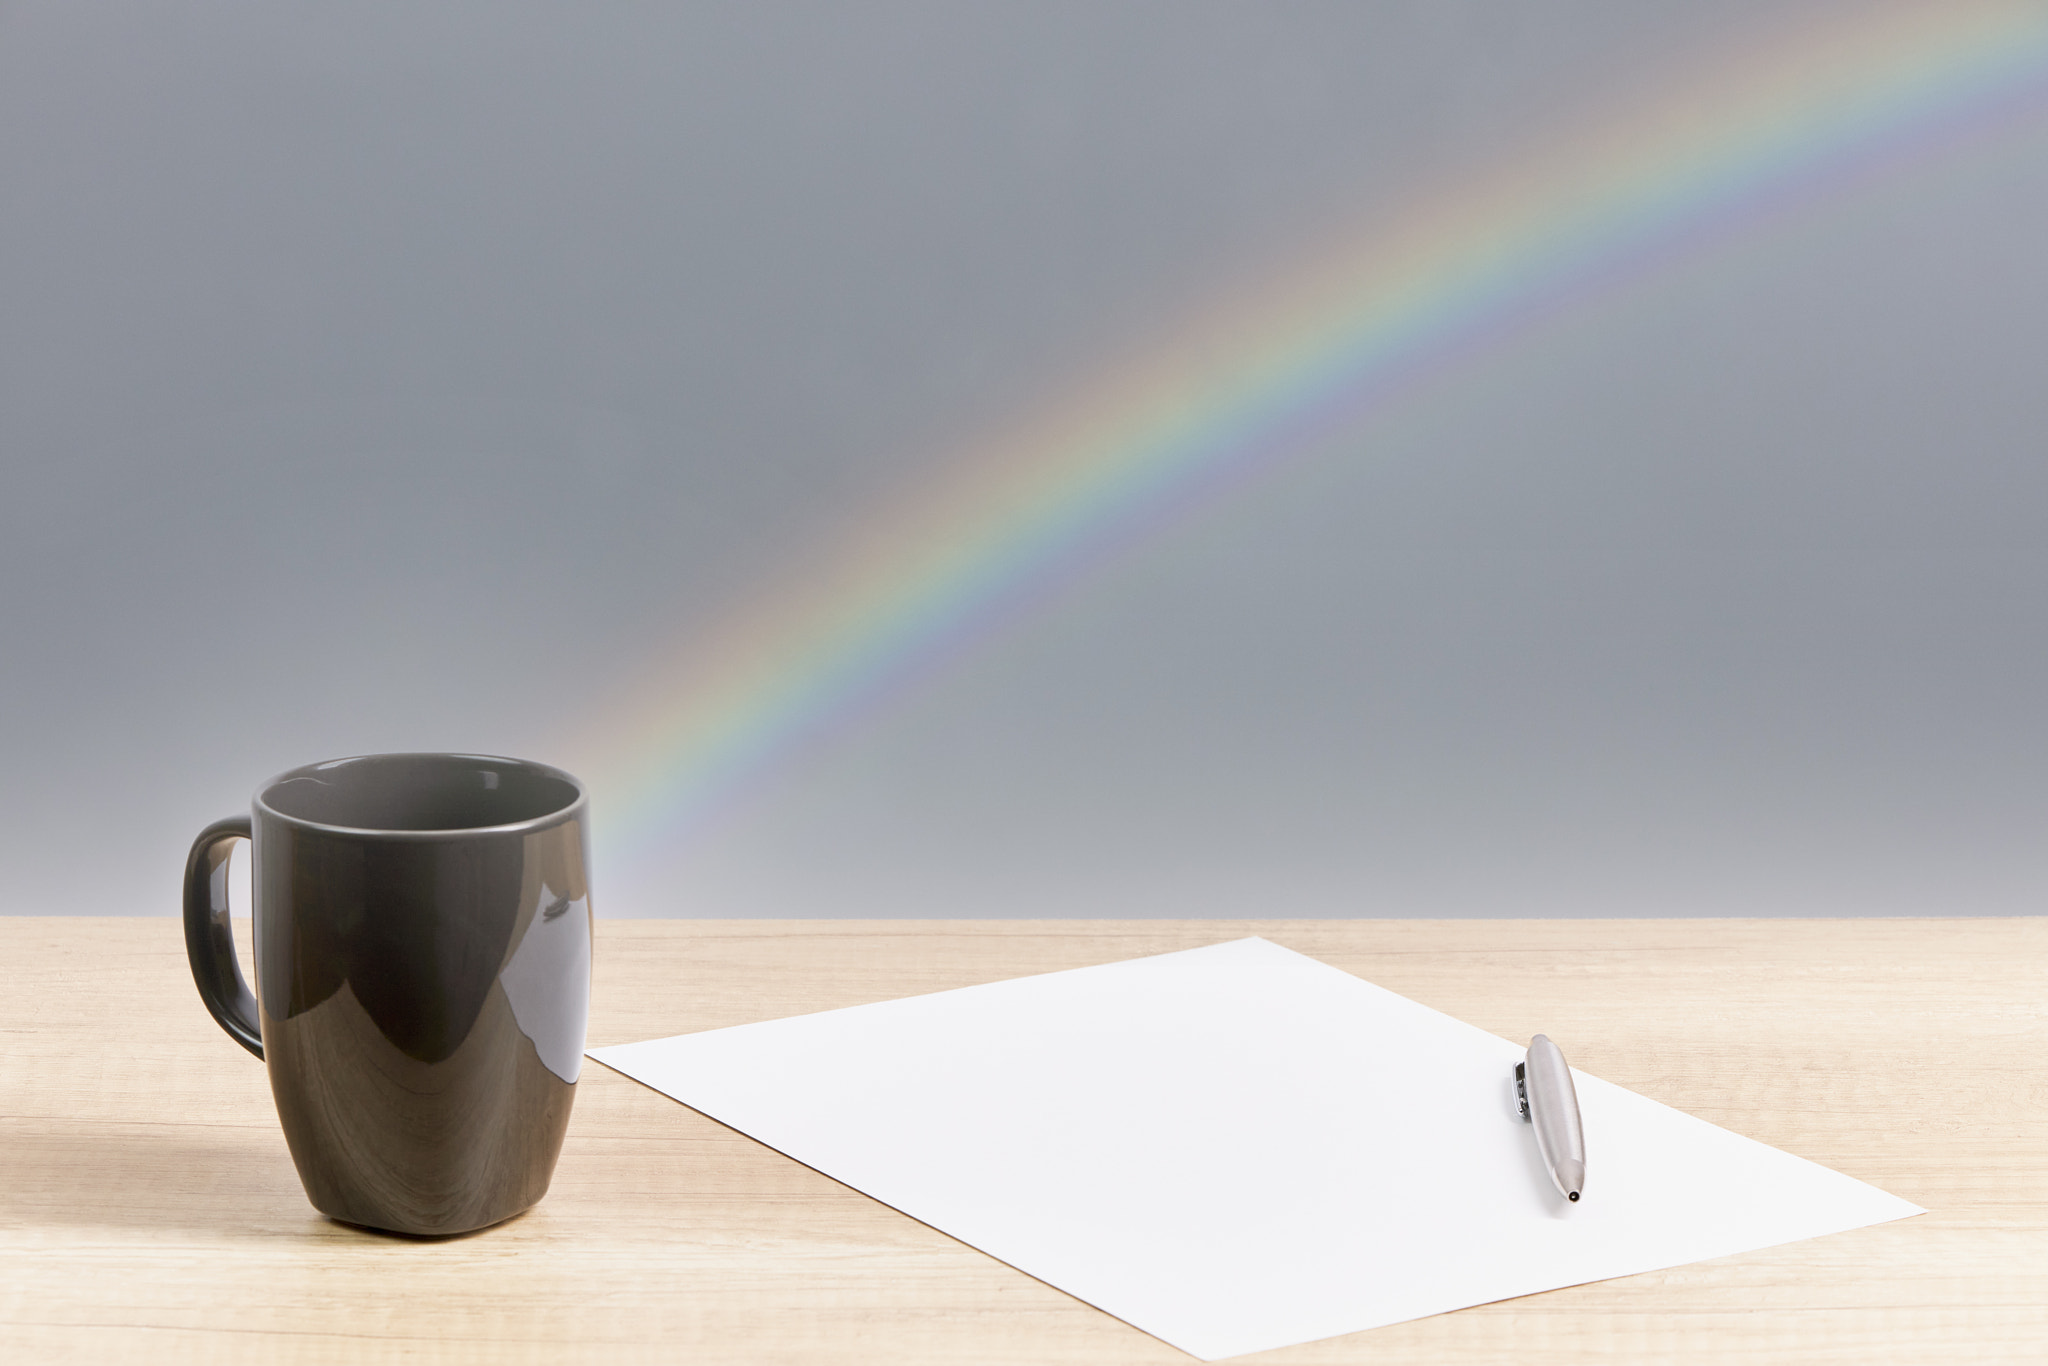 Pen on a paper, next to a cup and with the background of a rainbow